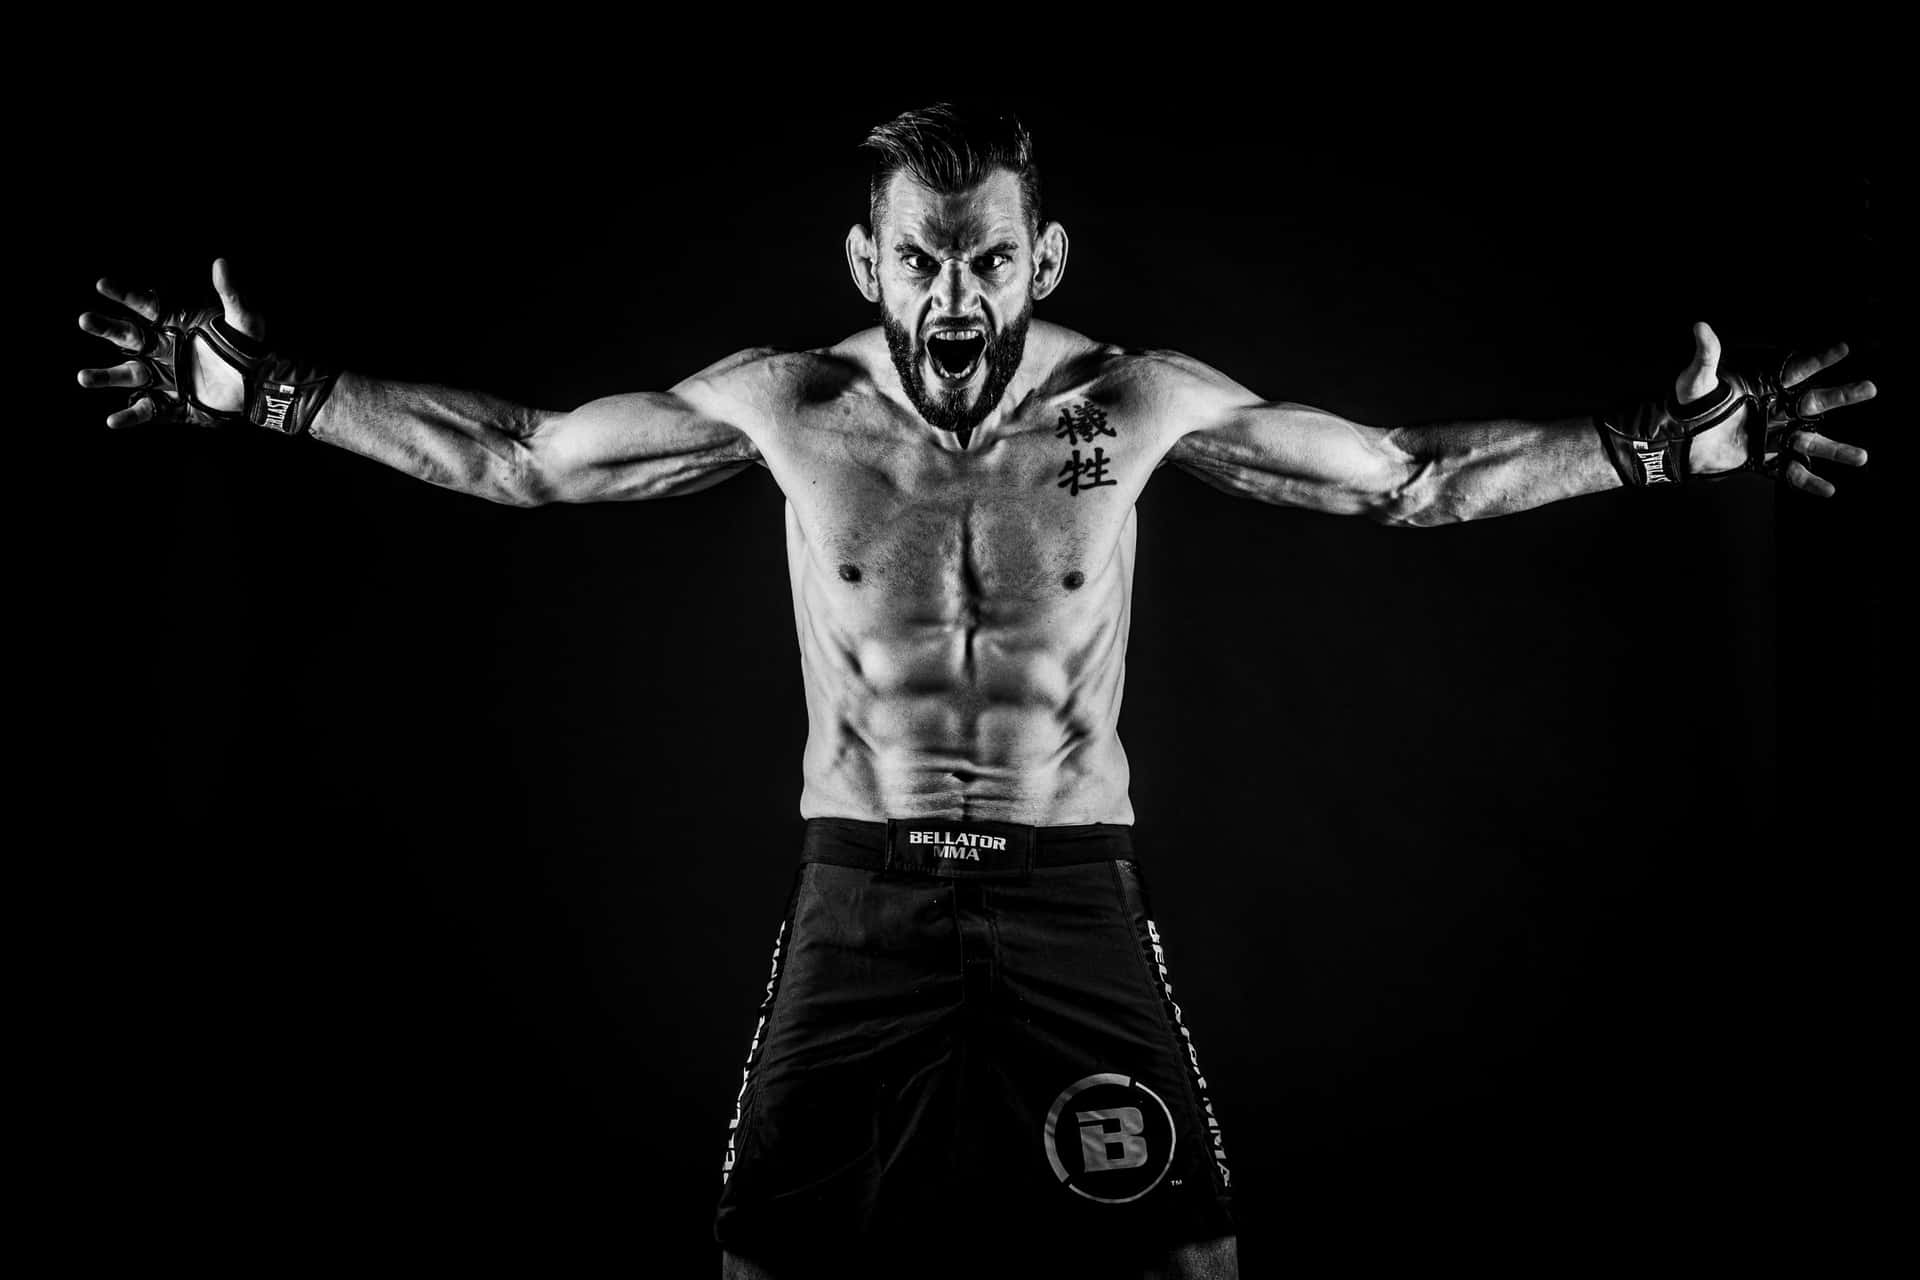 Download Jon Fitch Black And White Ufc Mma Fighter Wallpaper | Wallpapers .com